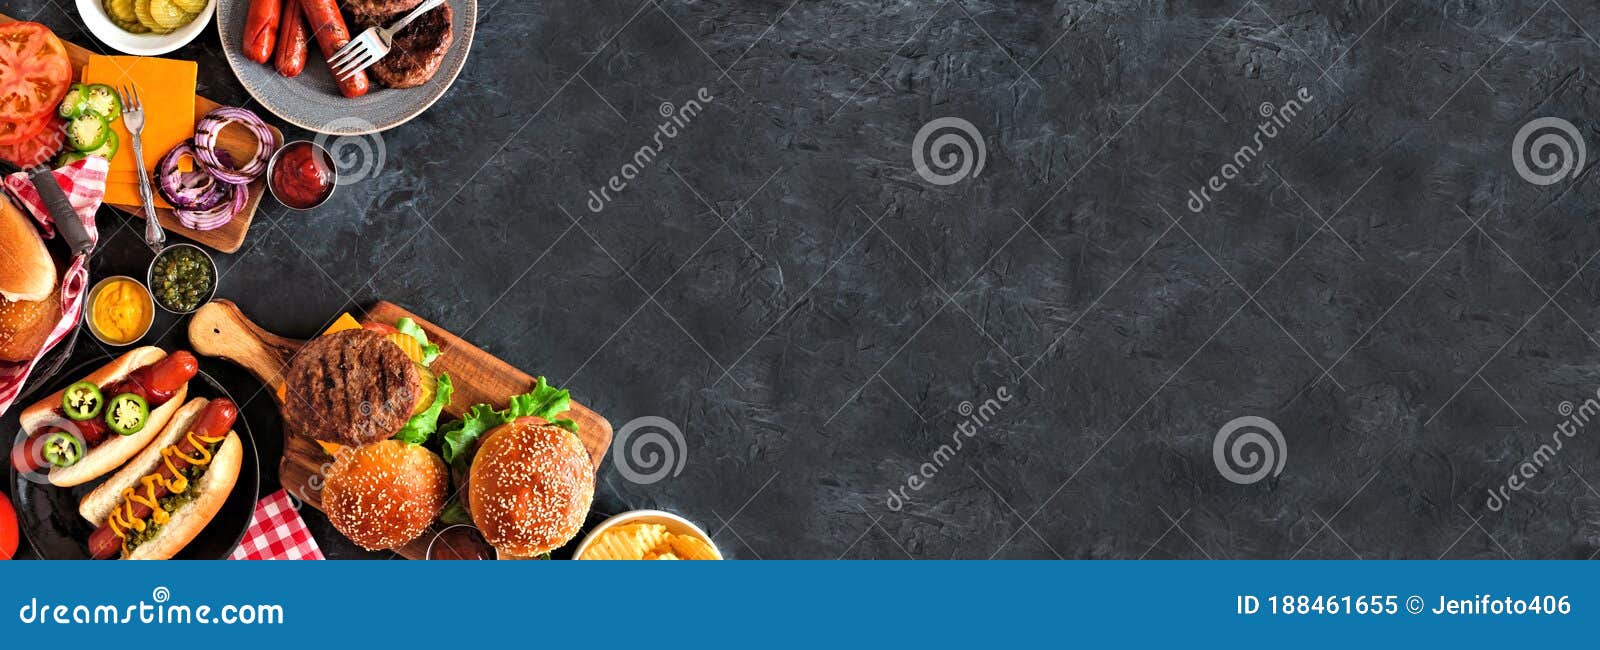 summer bbq food corner border with hot dog and hamburger buffet, top down view over a dark banner background